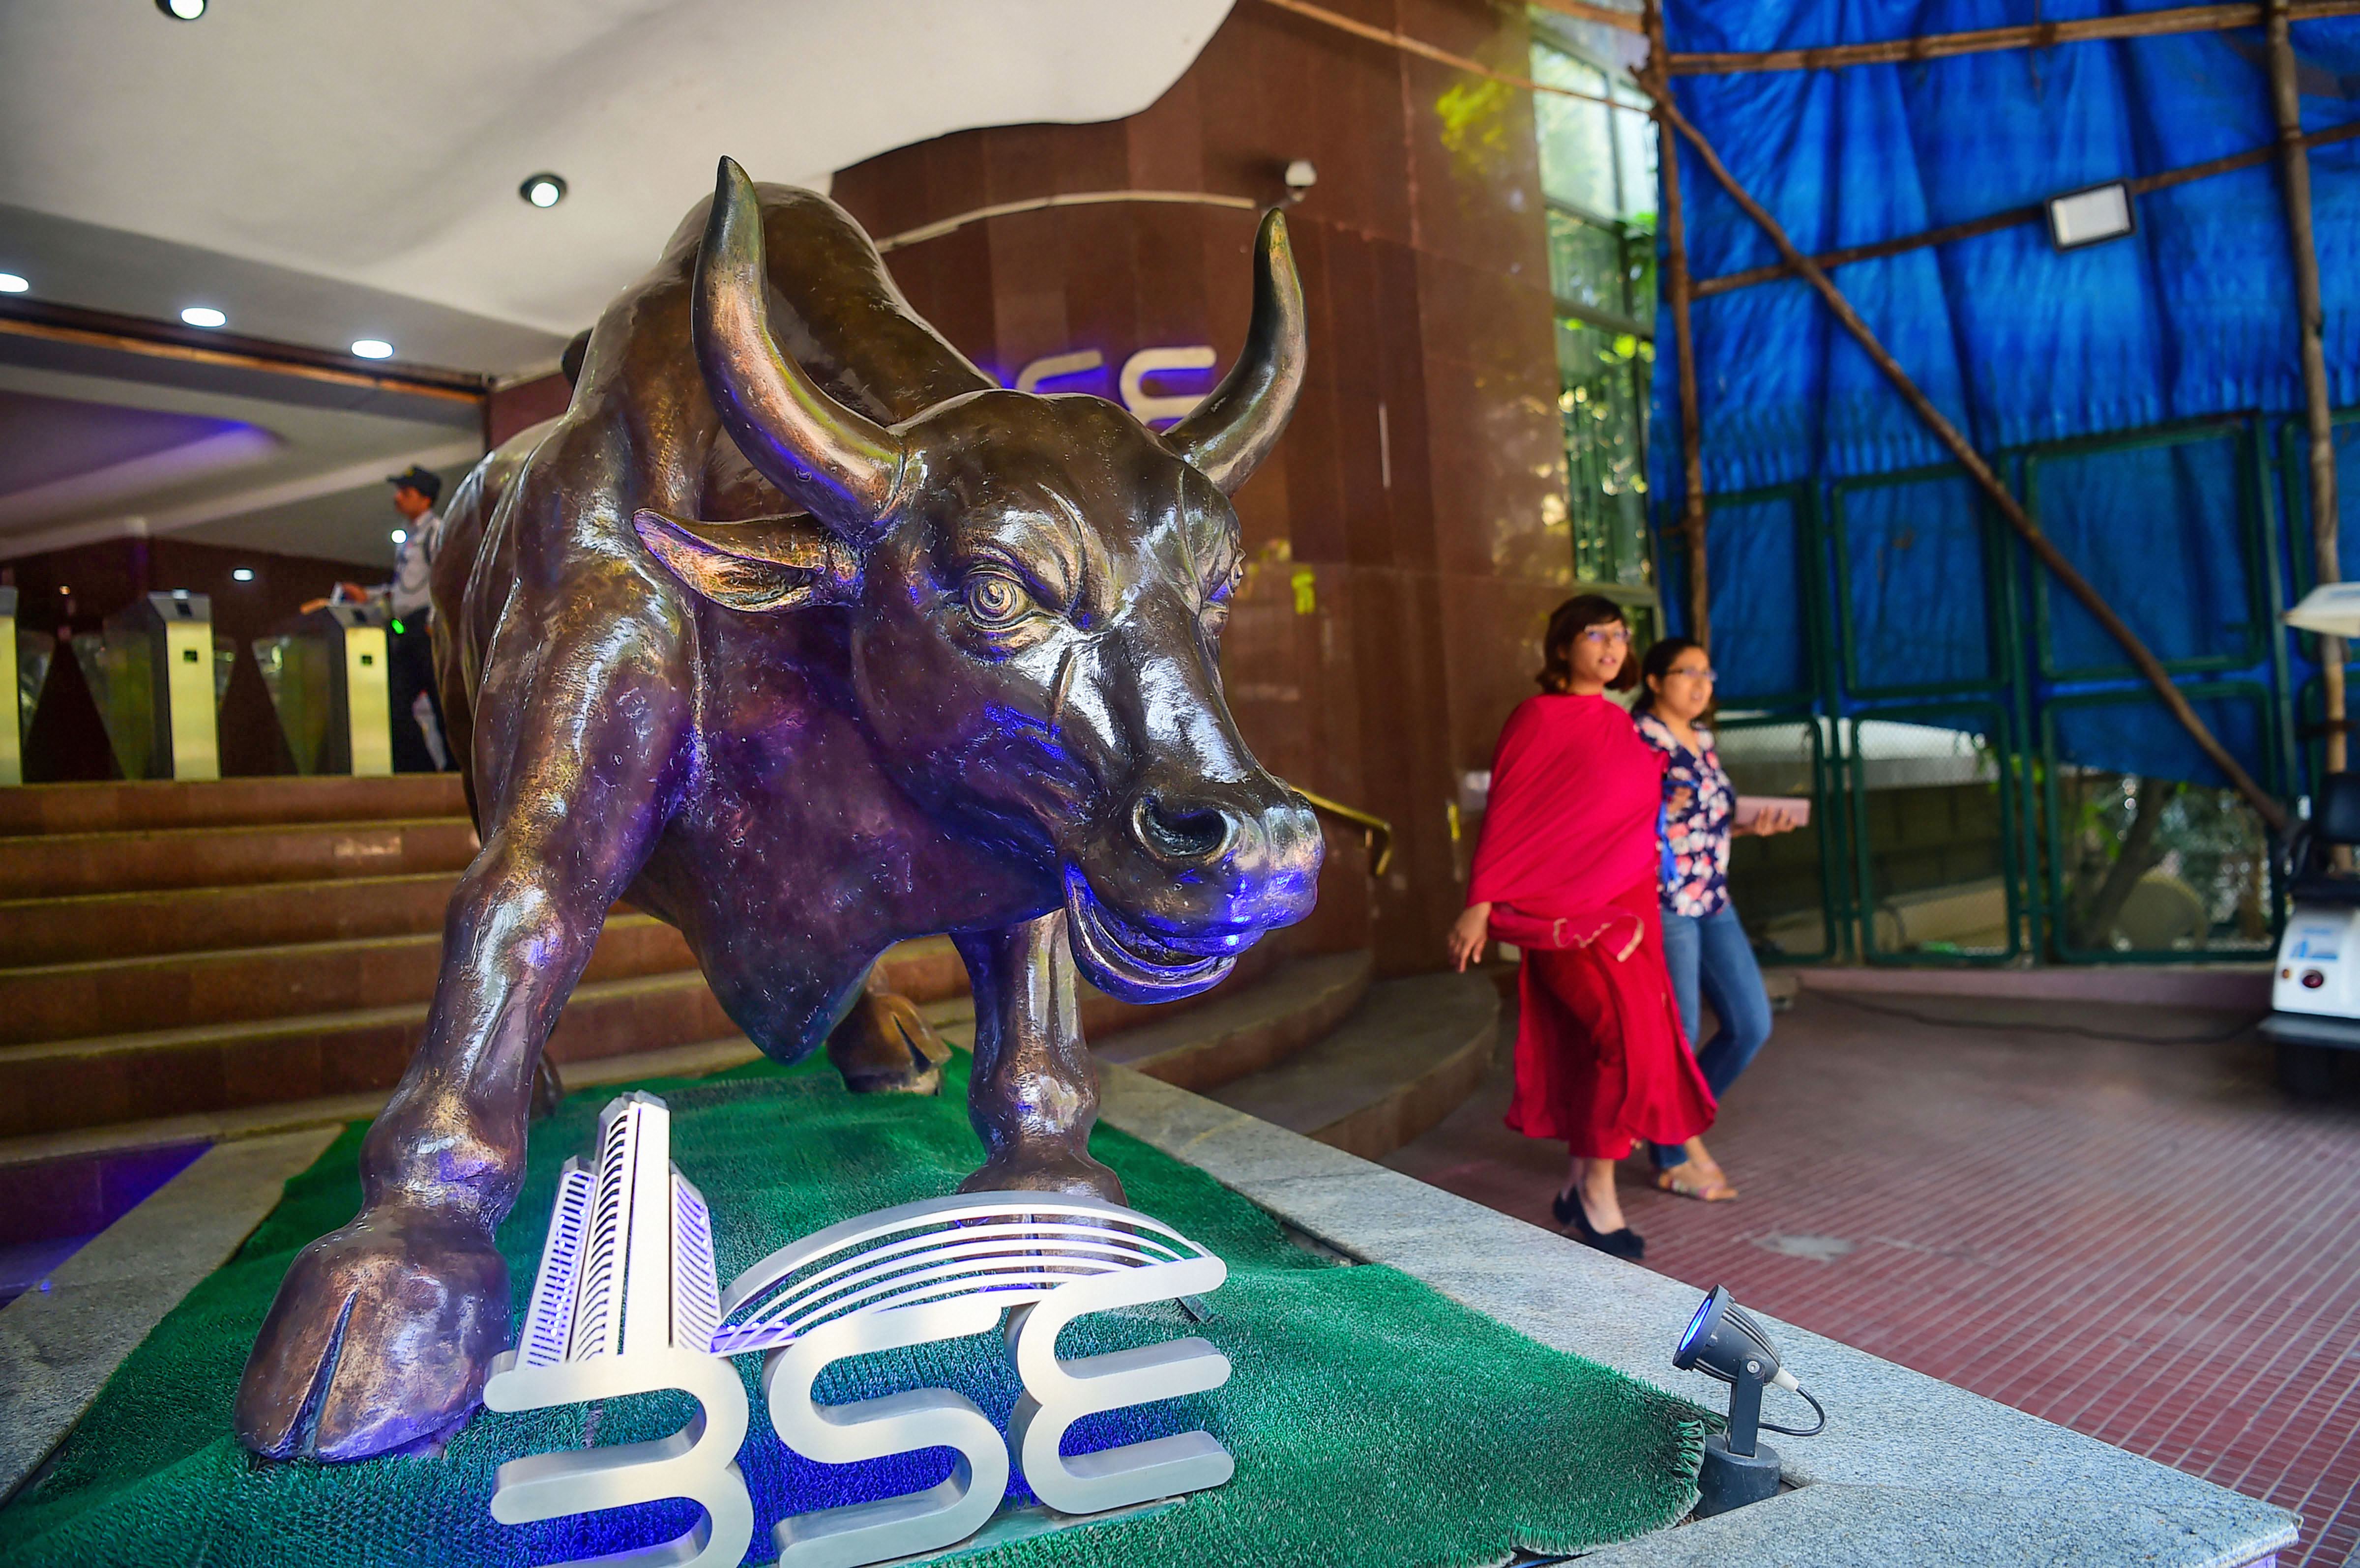 Sensex, Nifty end six-day fall as banking shares advance